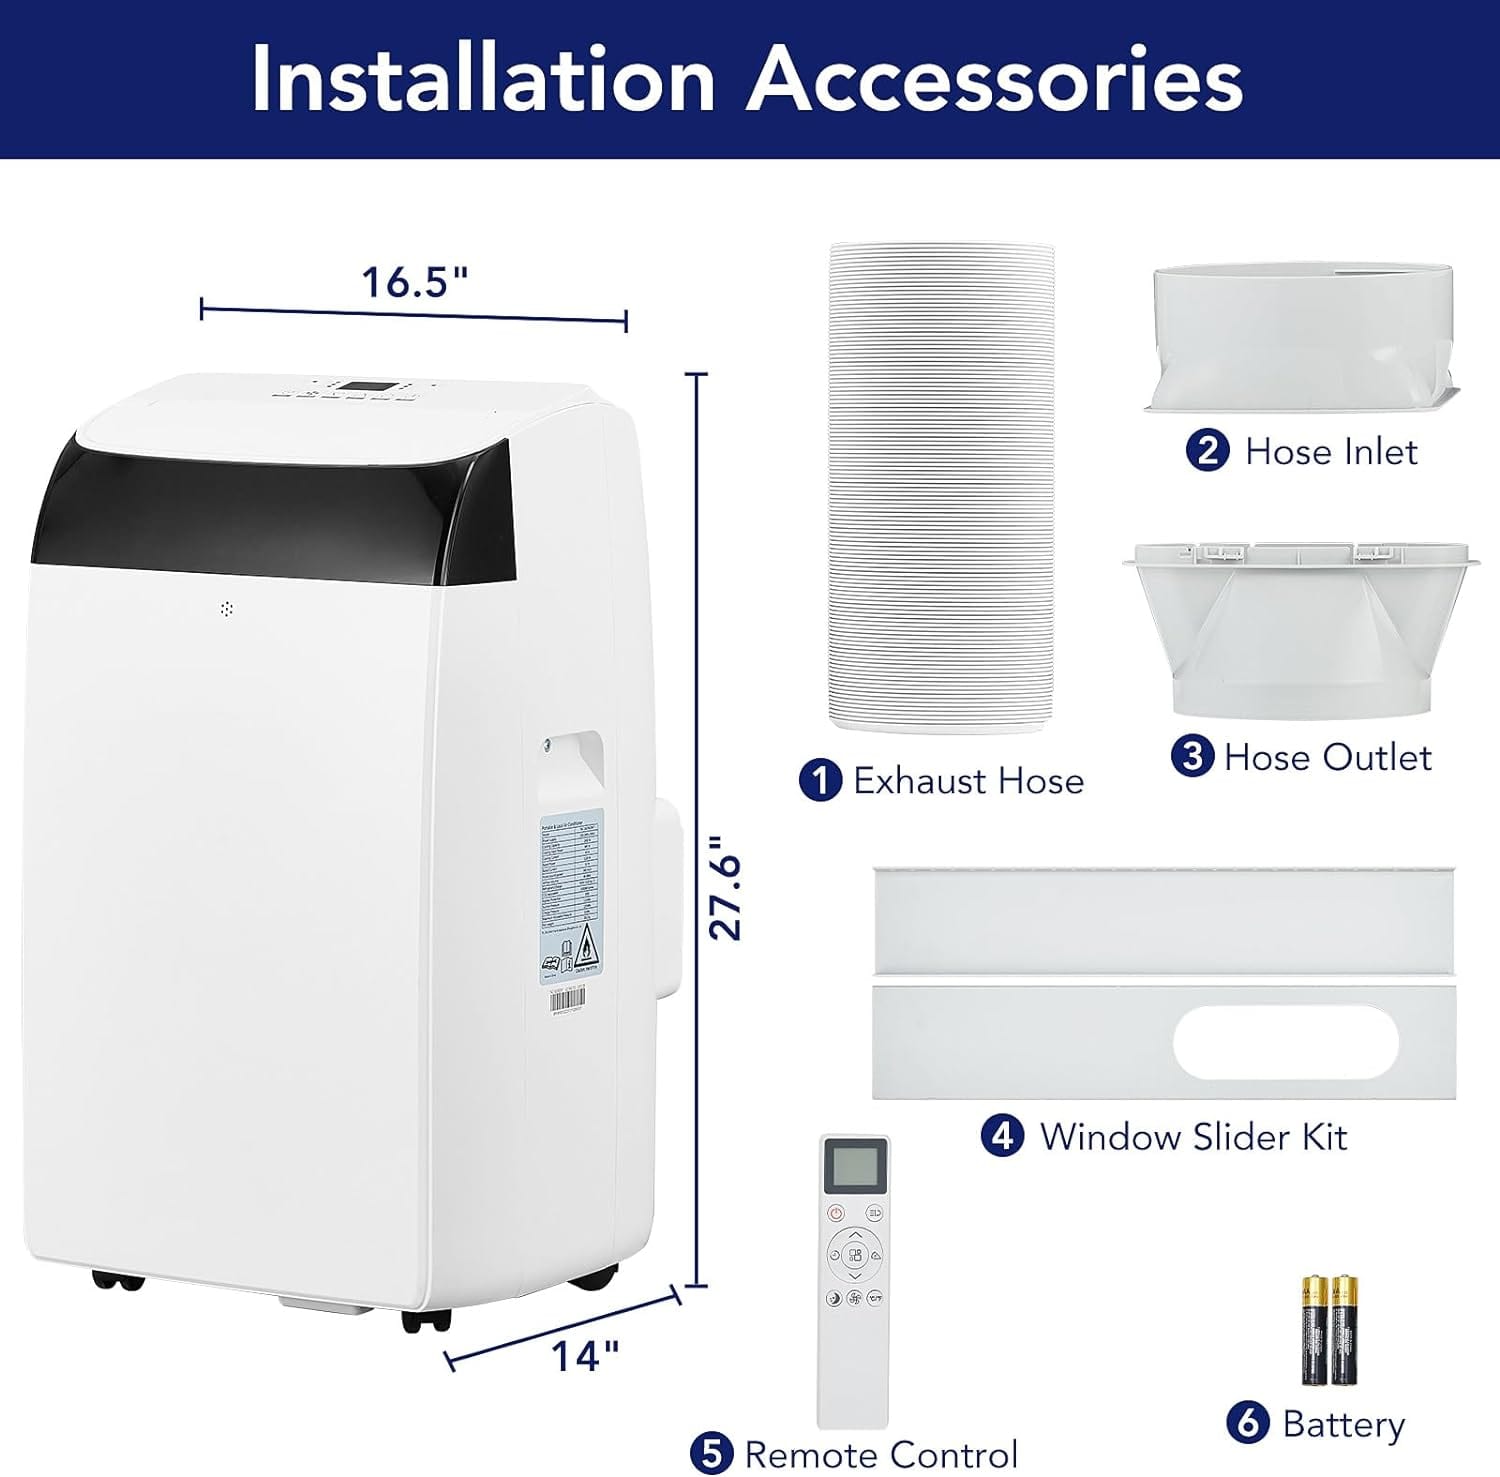 14,000 BTU Portable AC, Cools Up to 750 Sq.Ft, 3-in-1 for Home